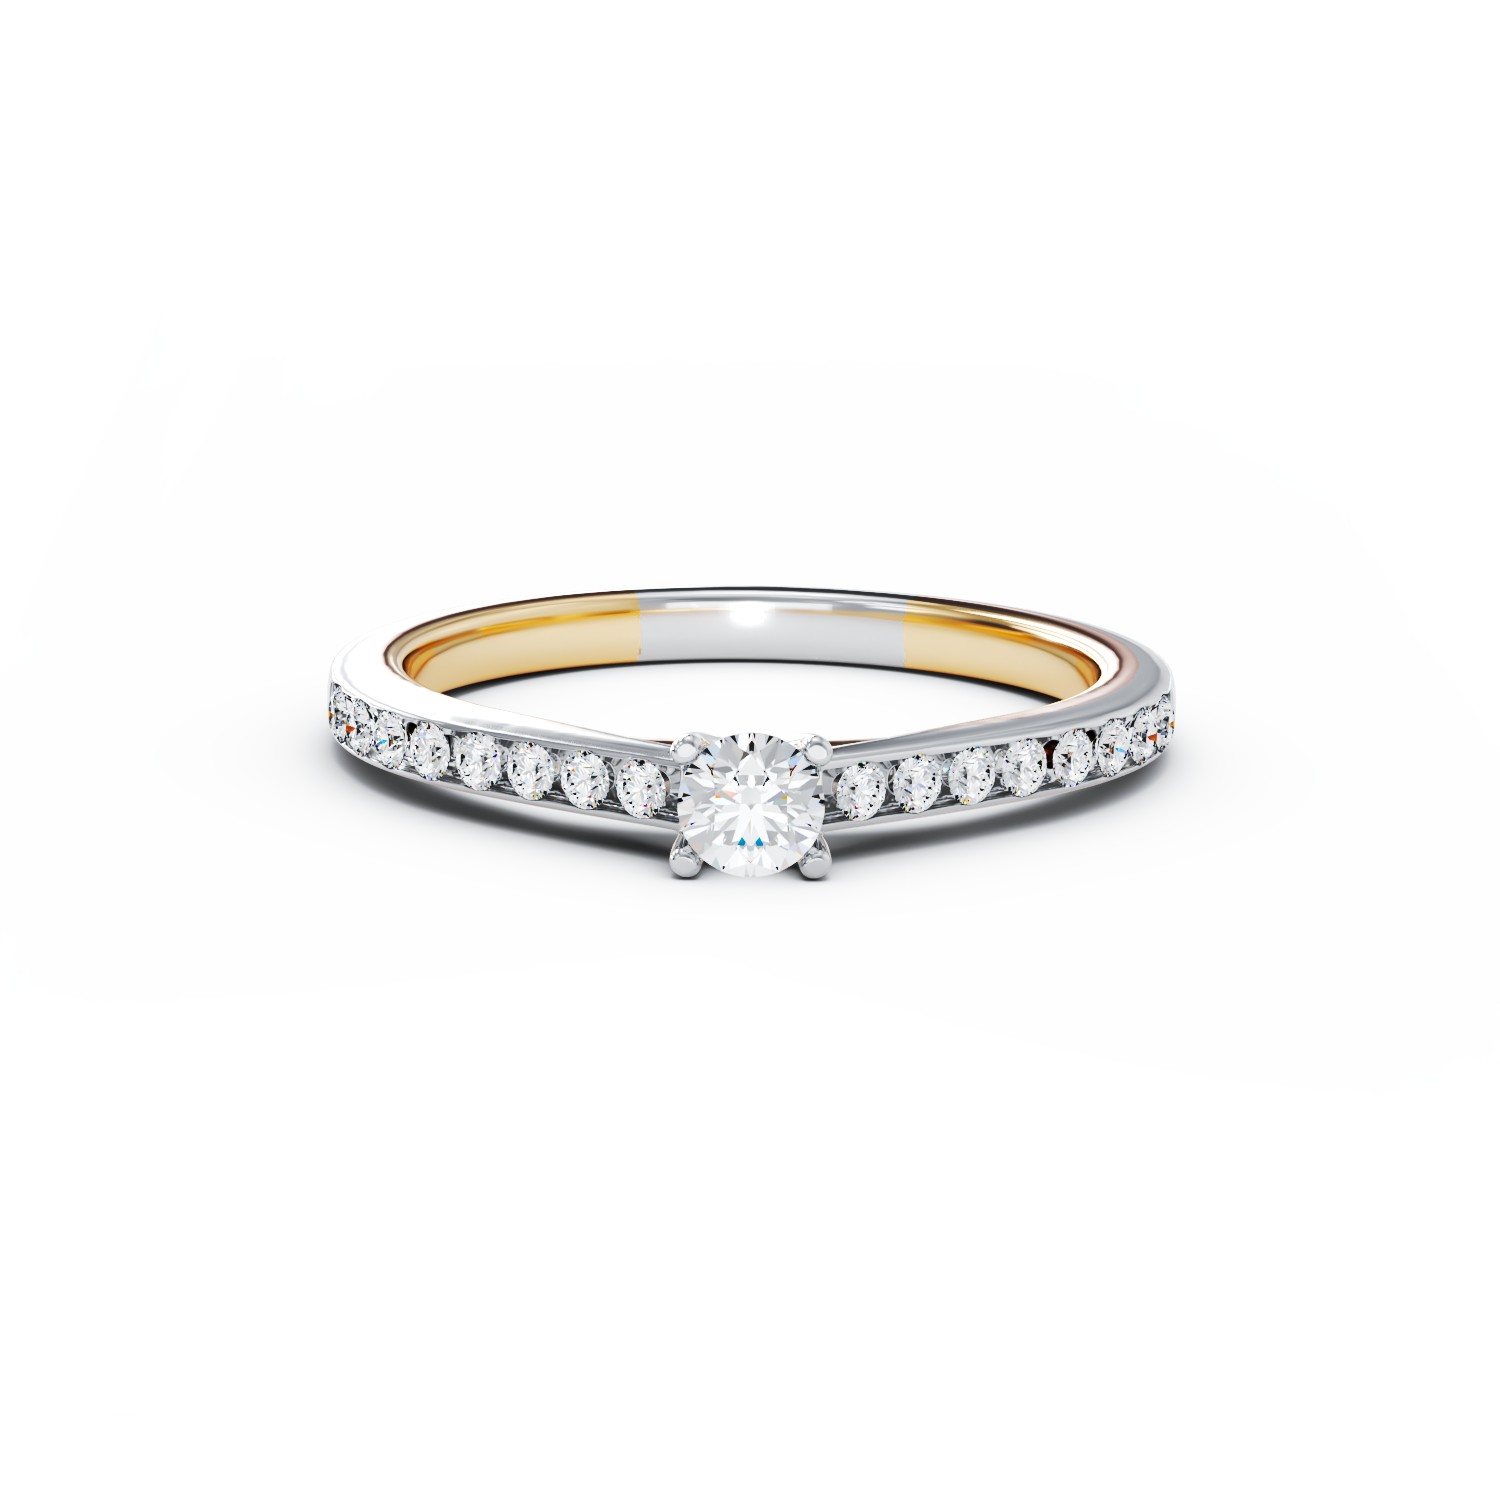 18K white gold engagement ring with 0.15ct diamond and 0.16ct diamonds